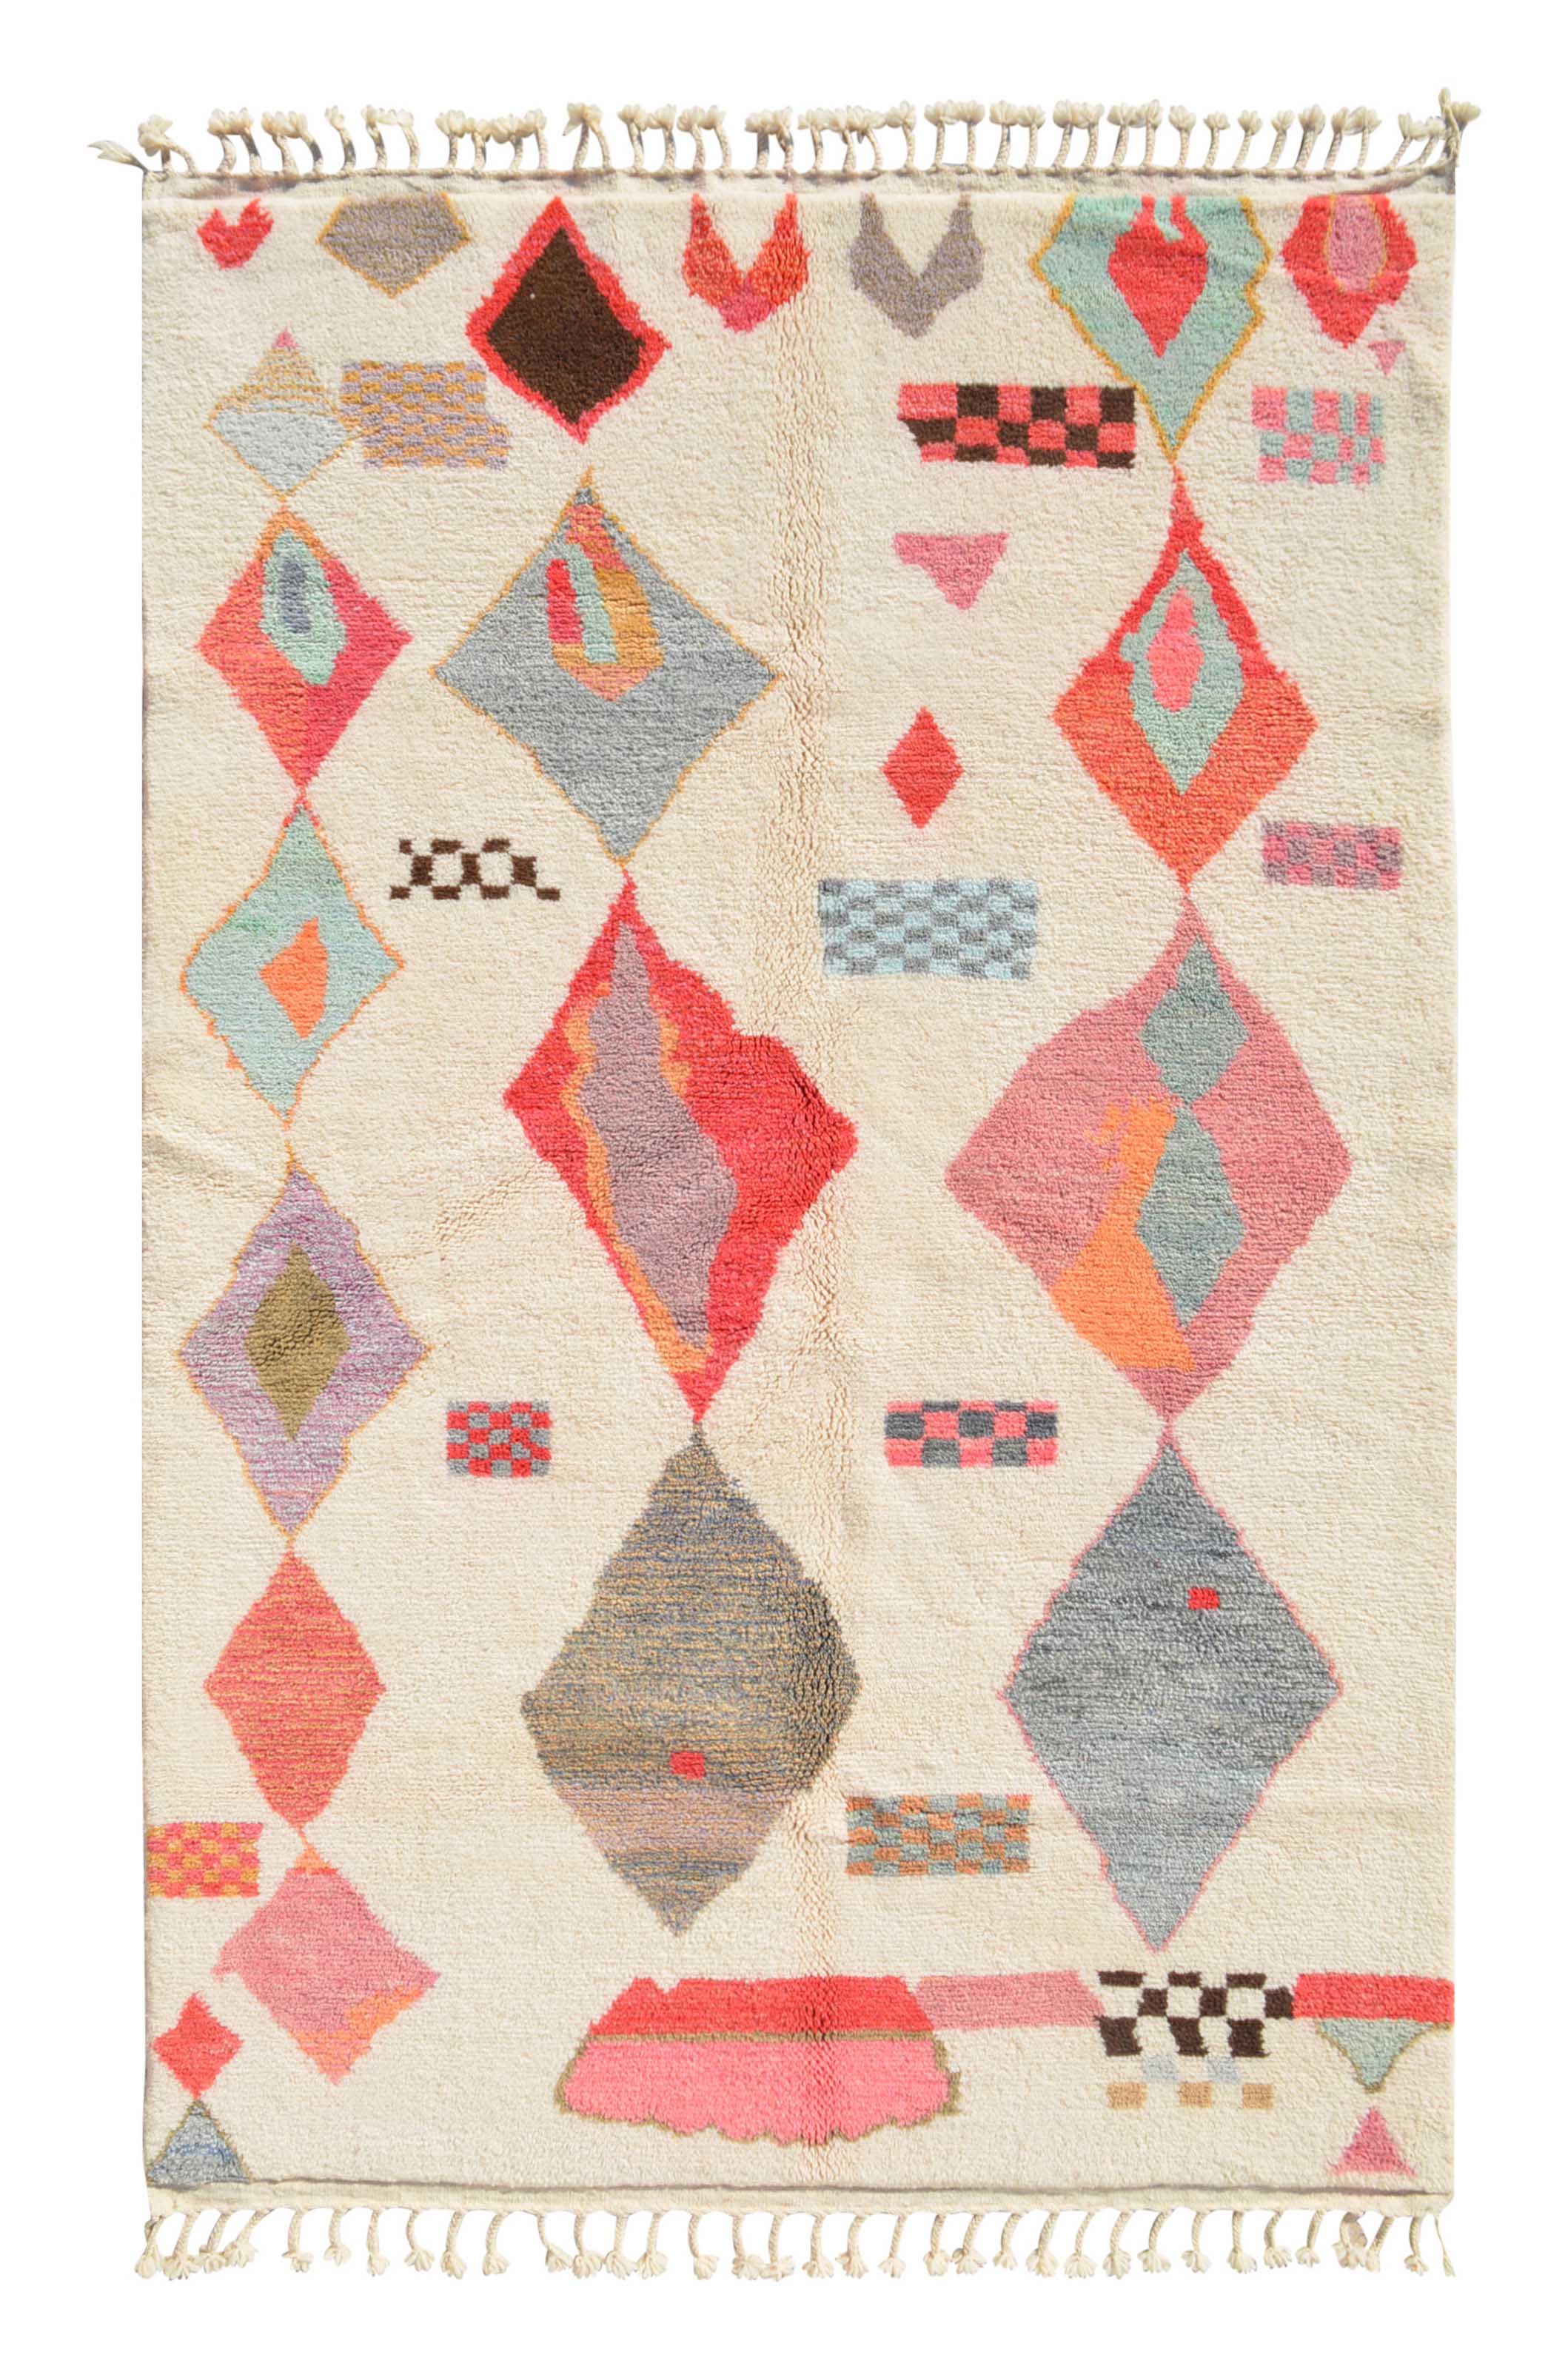 Moroccan Rug Chromatic Charm - Handmade Moroccan Rug with a Colorful New Design - Add a pop of color to your home Illuminate Collective